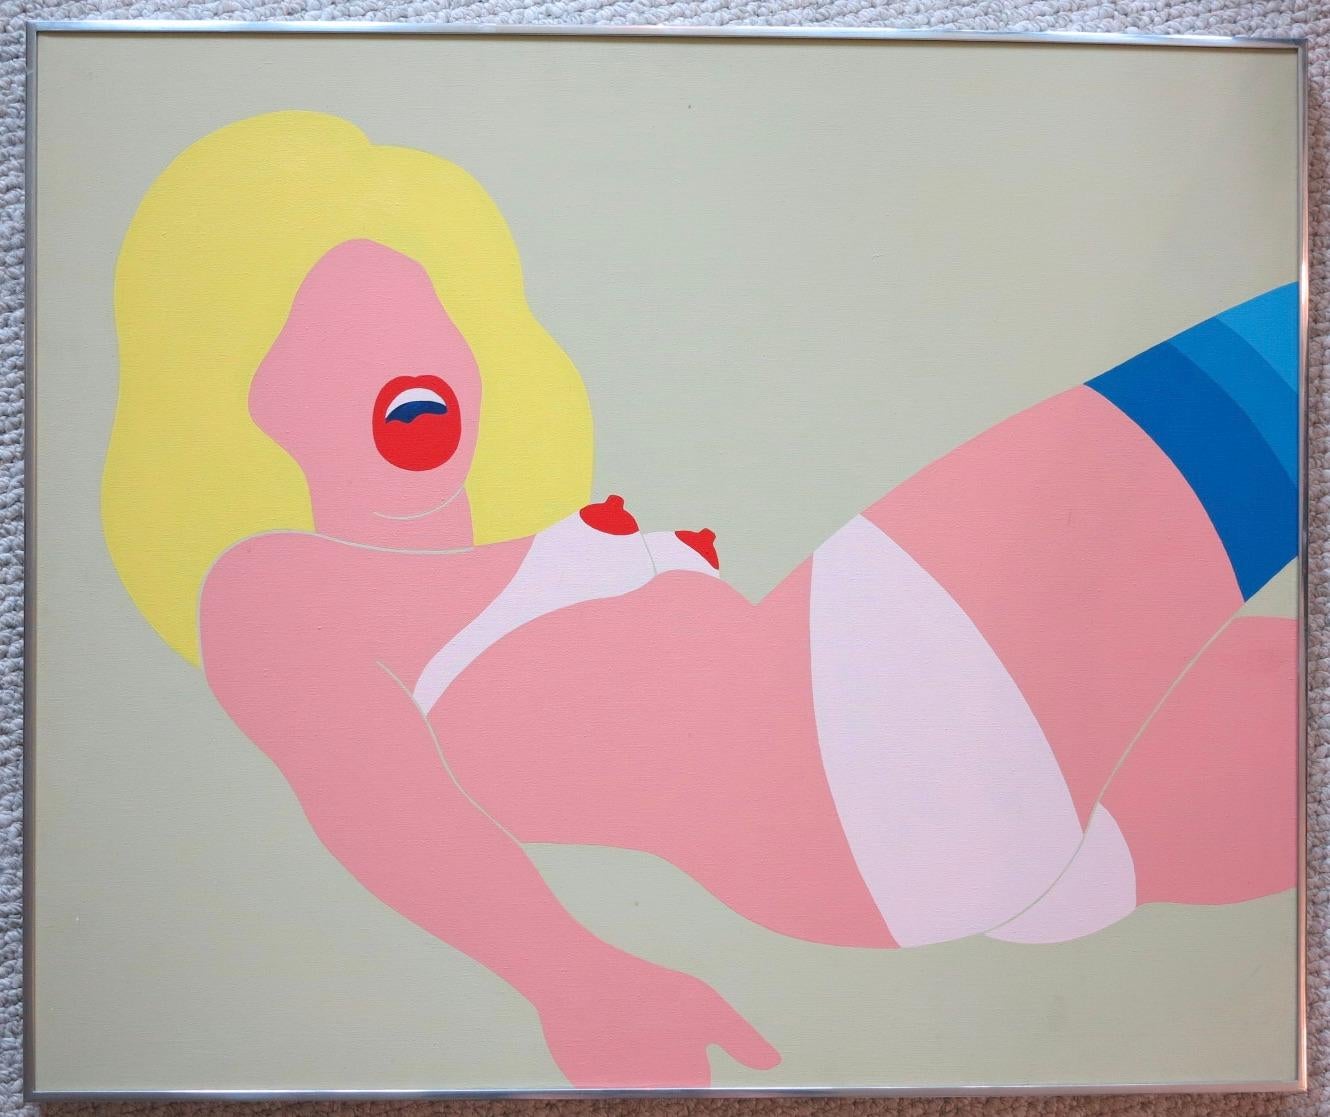 Pop Art reclining nude woman painting - Painting by Unknown